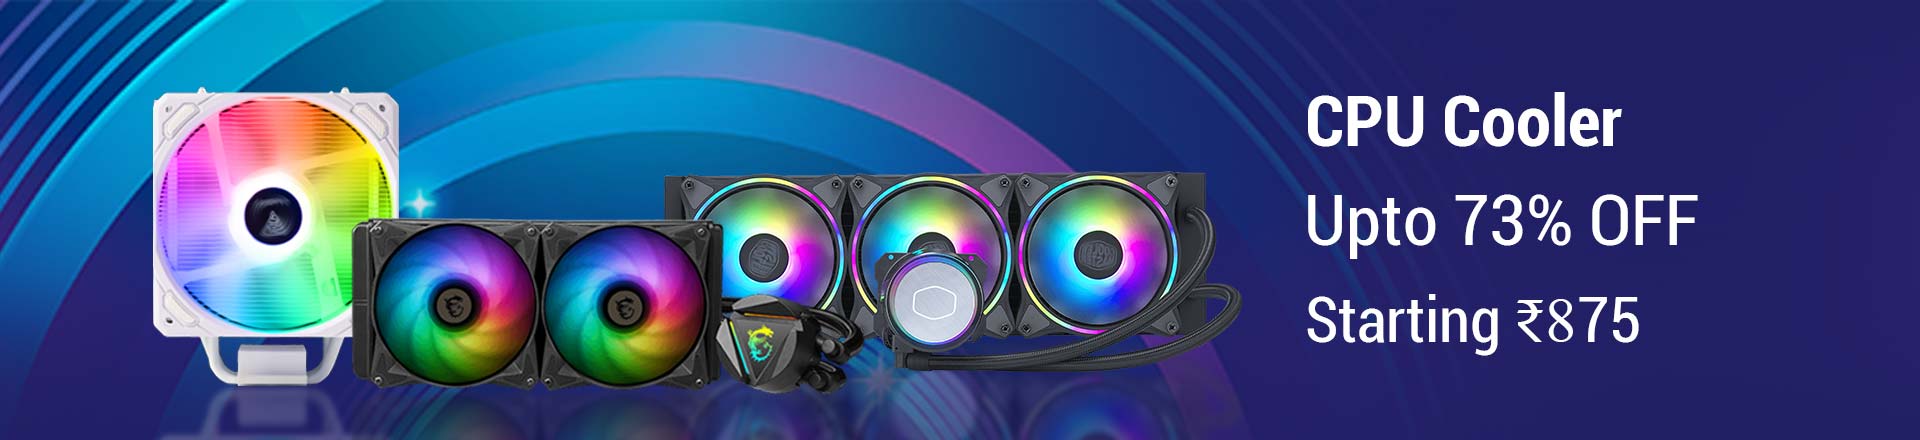 Cpu Cooler Category Page Banner